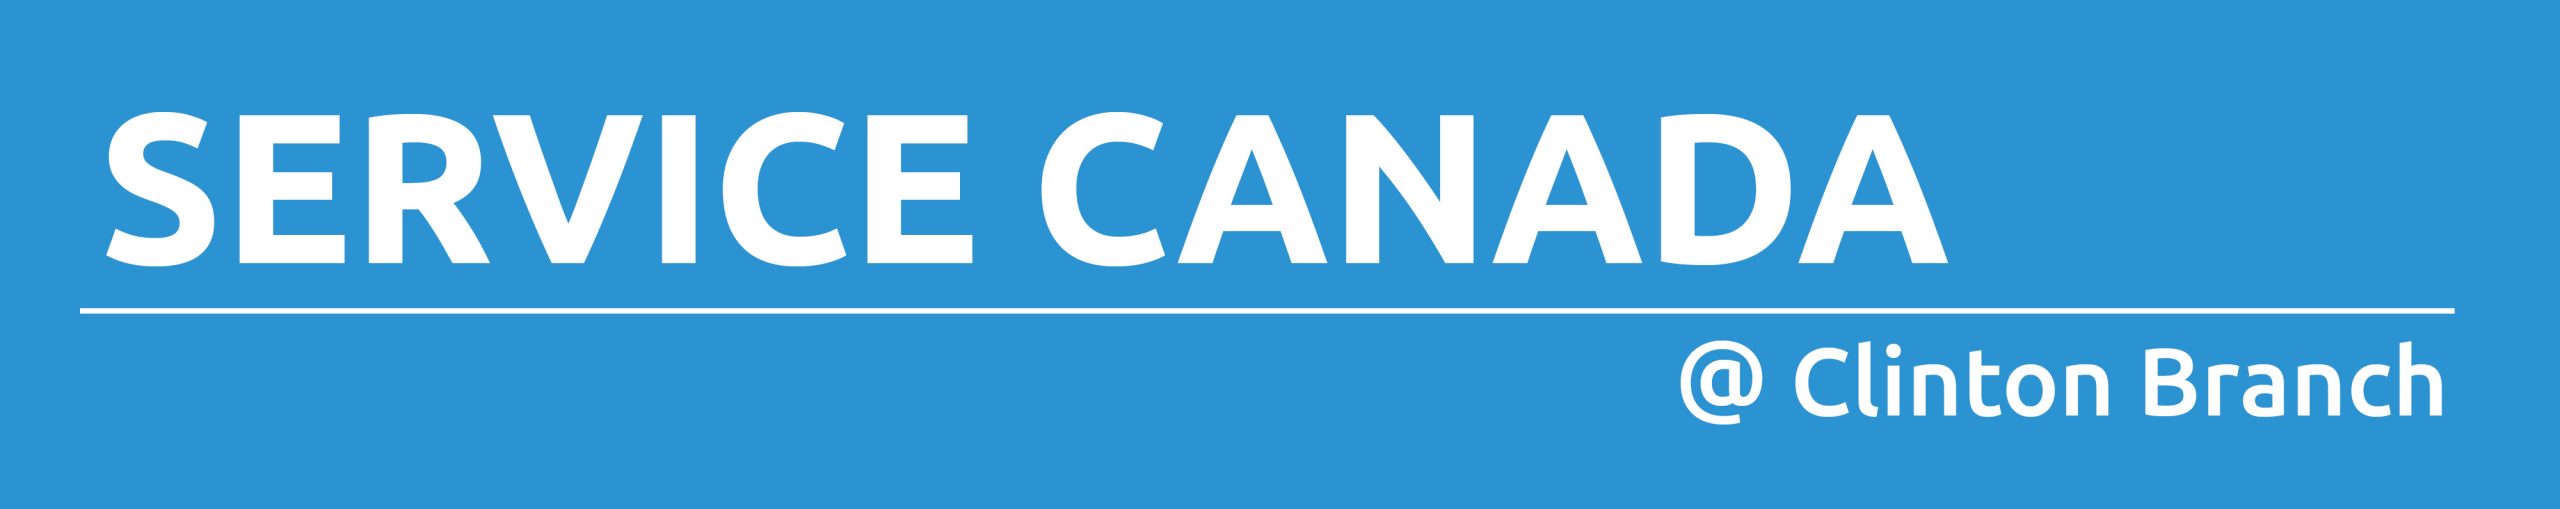 Light blue rectangle with text promoting Service Canada at Clinton Branch